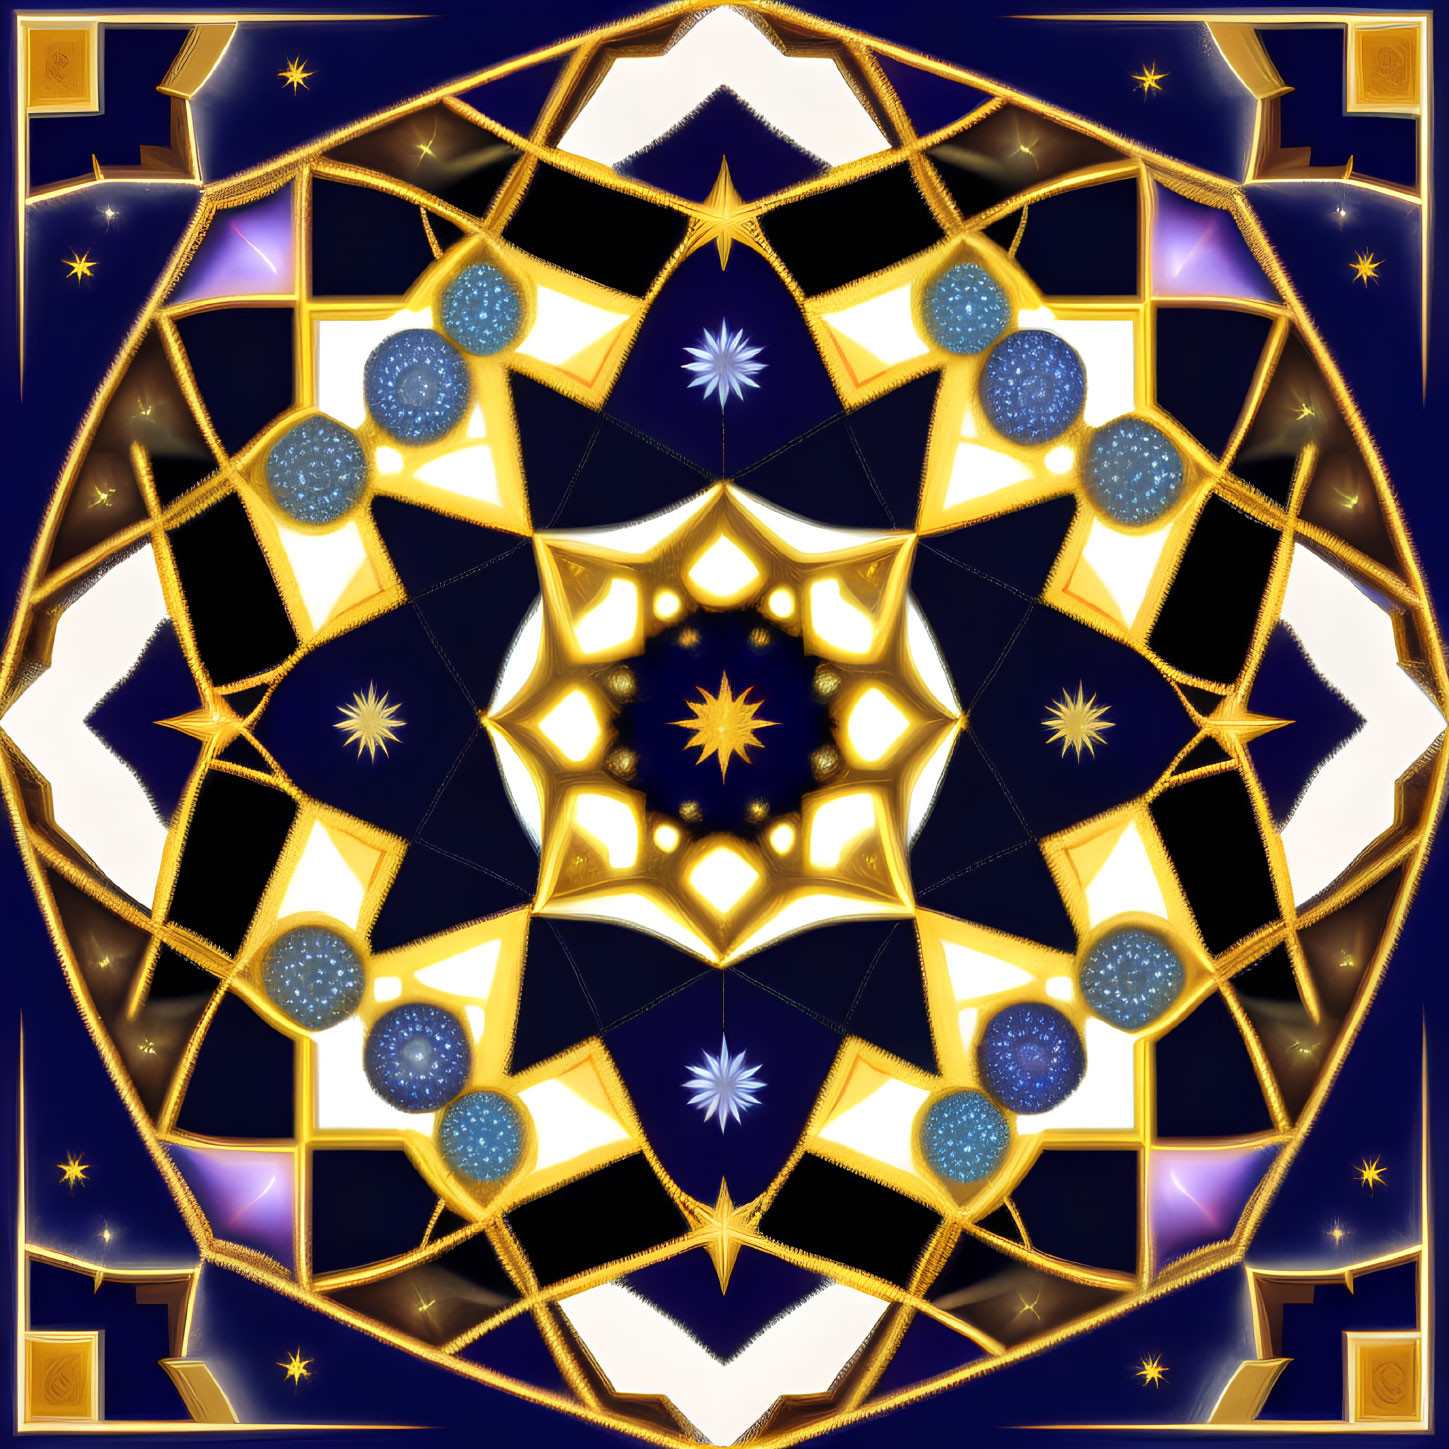 Symmetrical Kaleidoscope Pattern with Gold Stars and Blue Orbs